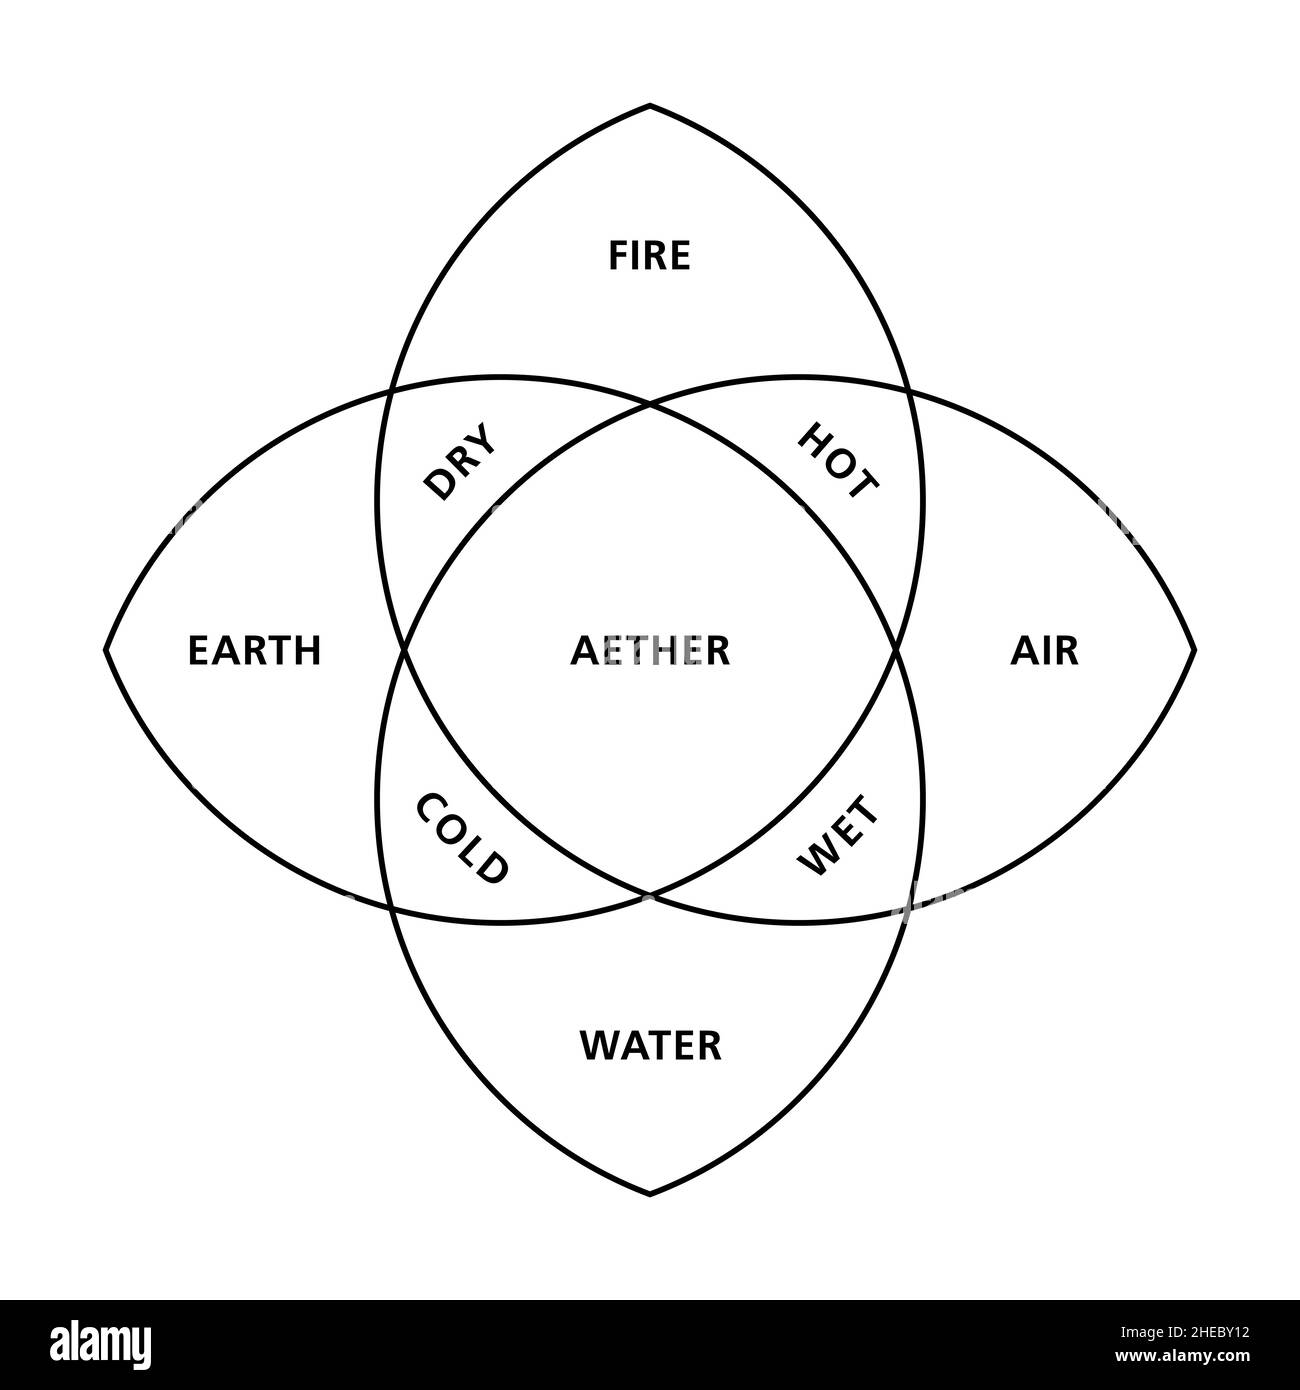 The four elements fire, earth, water and air with their qualities hot, dry, cold and wet, as described by the ancient Greek philosopher Empedocles. Stock Photo